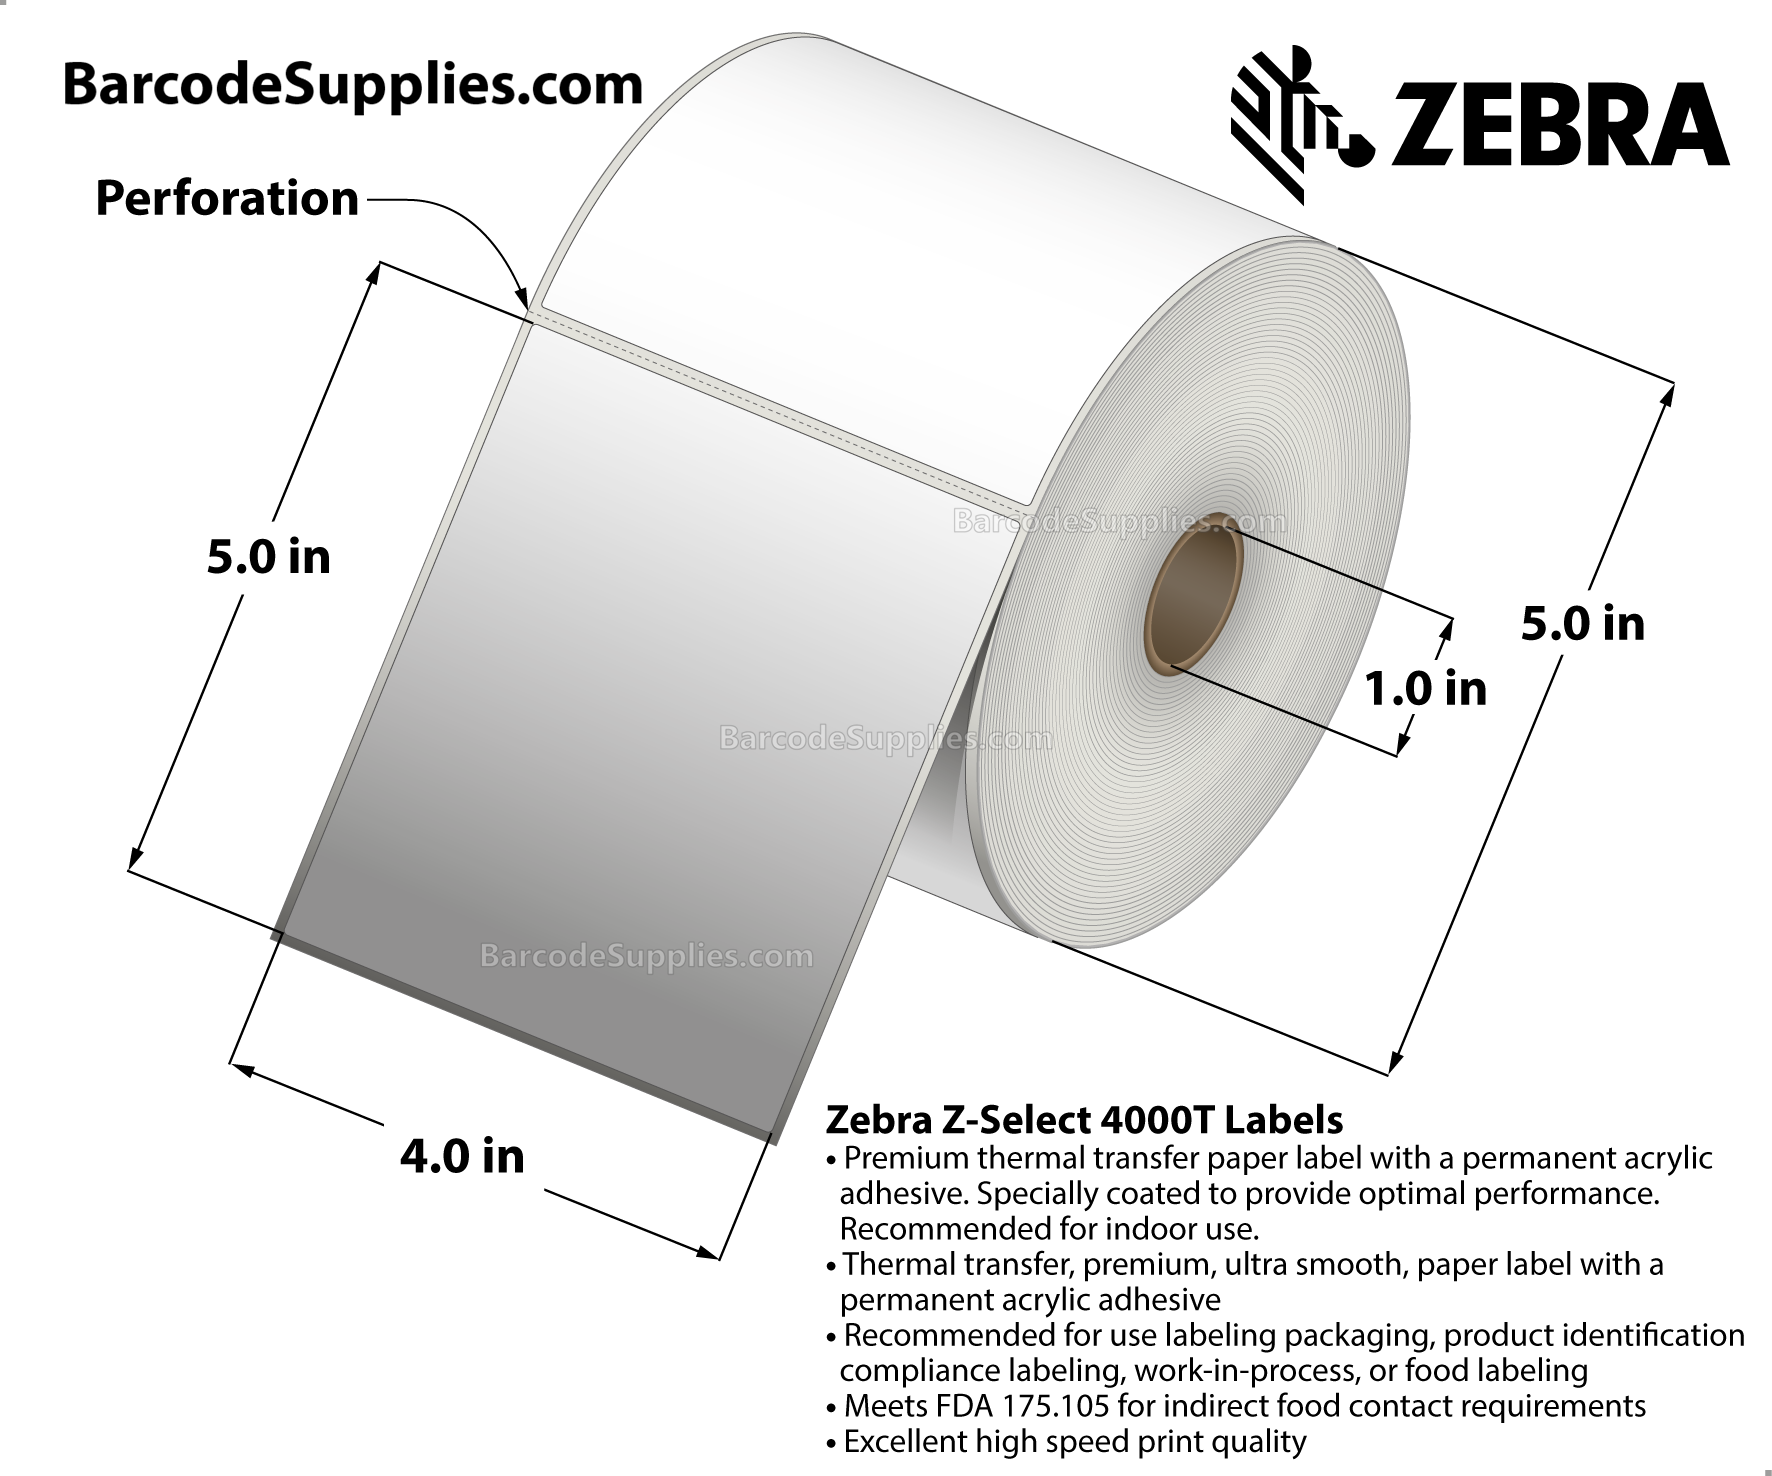 4 x 5 Thermal Transfer White Z-Select 4000T Labels With Permanent Adhesive - Perforated - 570 Labels Per Roll - Carton Of 6 Rolls - 3420 Labels Total - MPN: 10009531